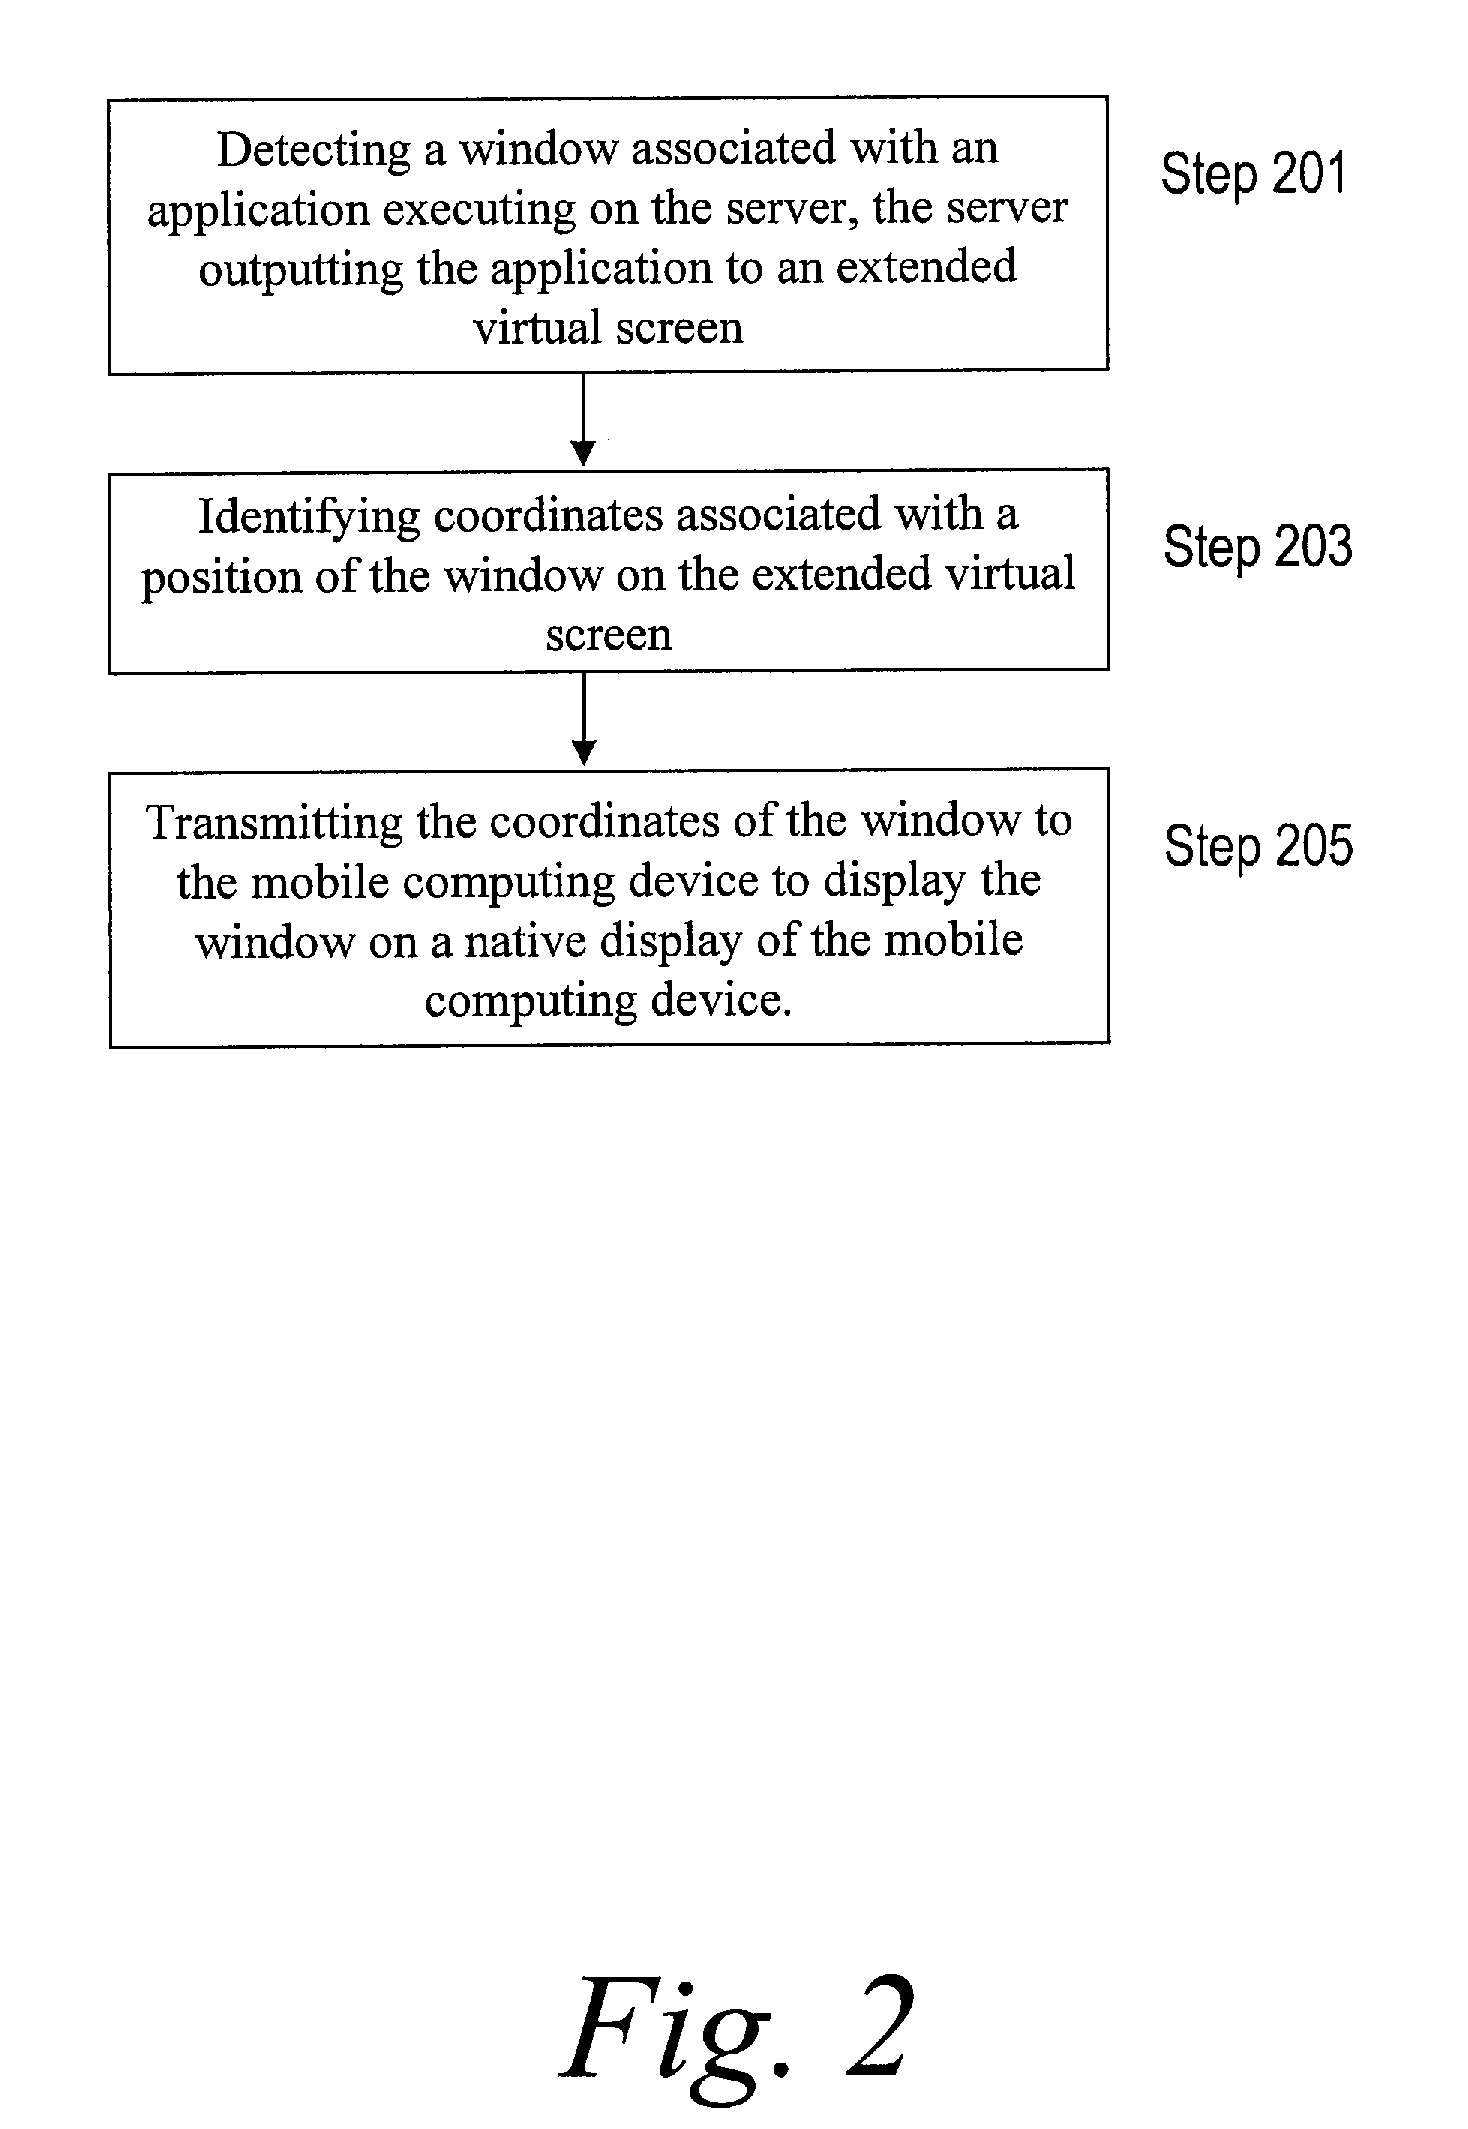 Panning a native display on a mobile computing device to a window, interpreting a gesture-based instruction to scroll contents of the window, and wrapping text on the window